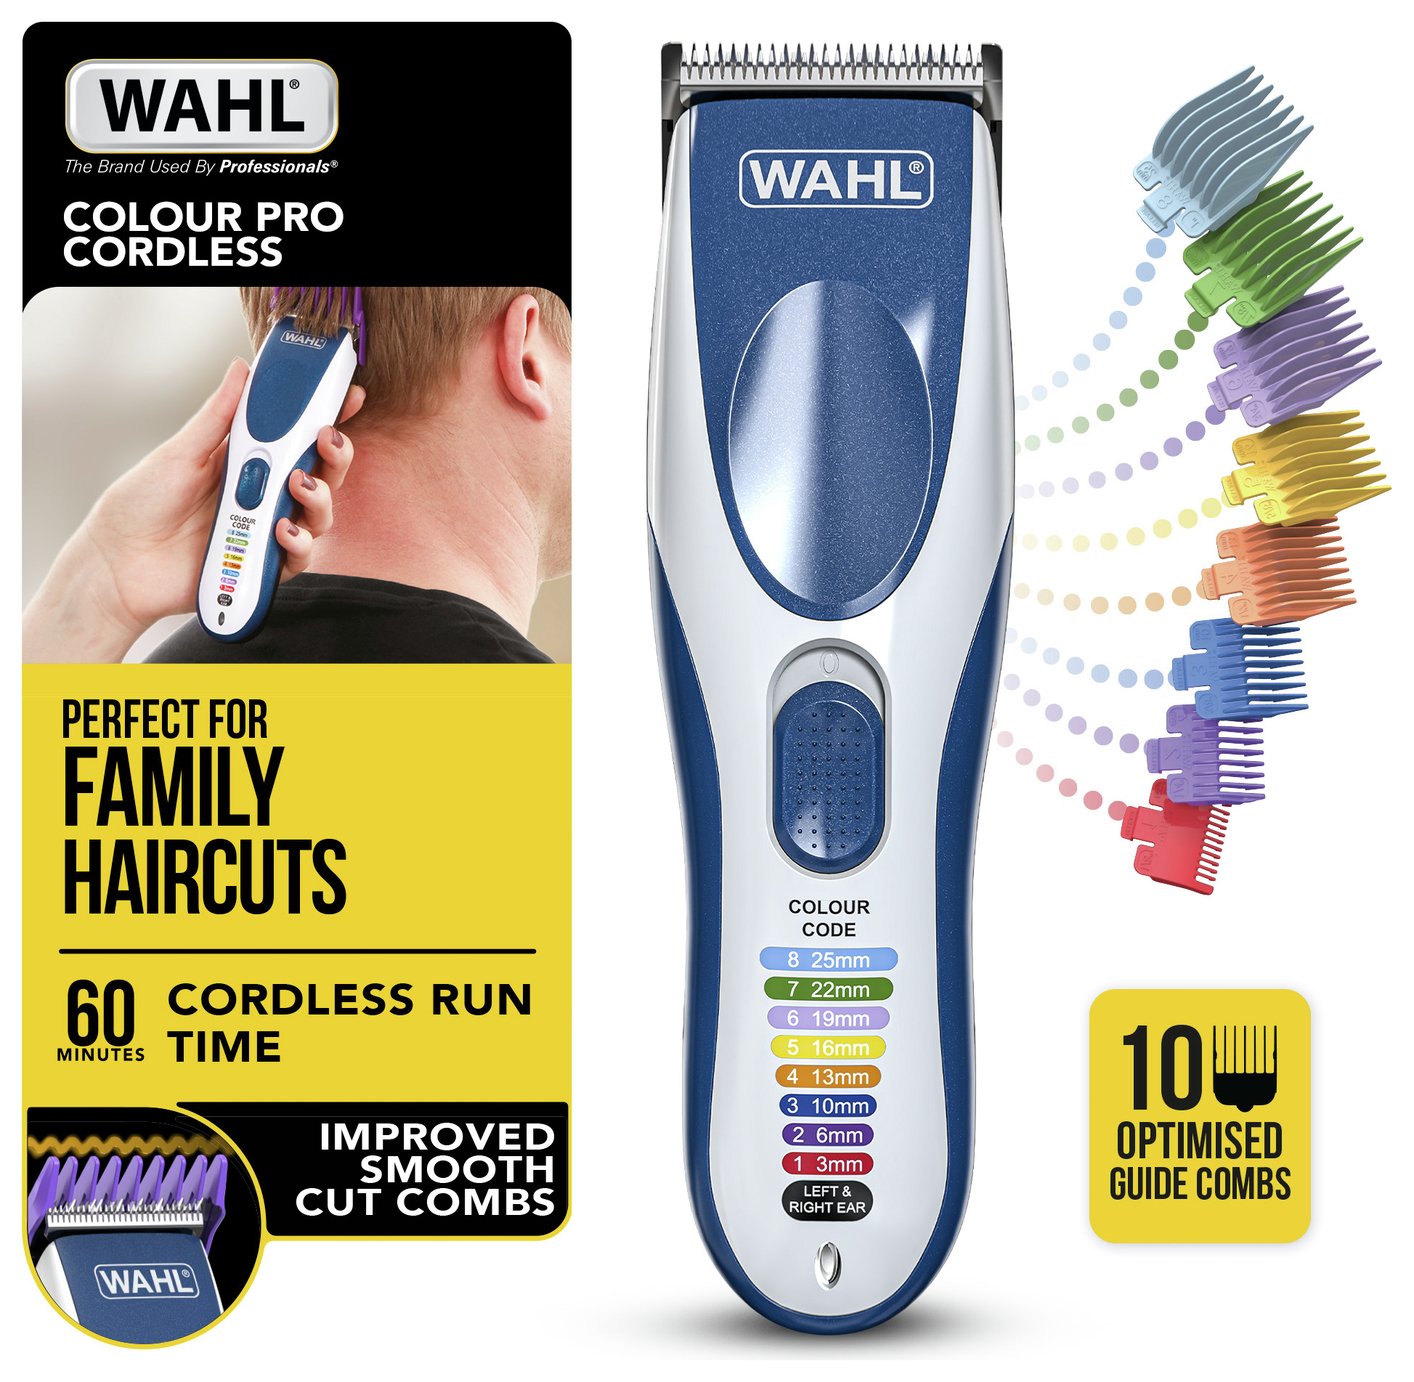 hair clippers with 25mm guard